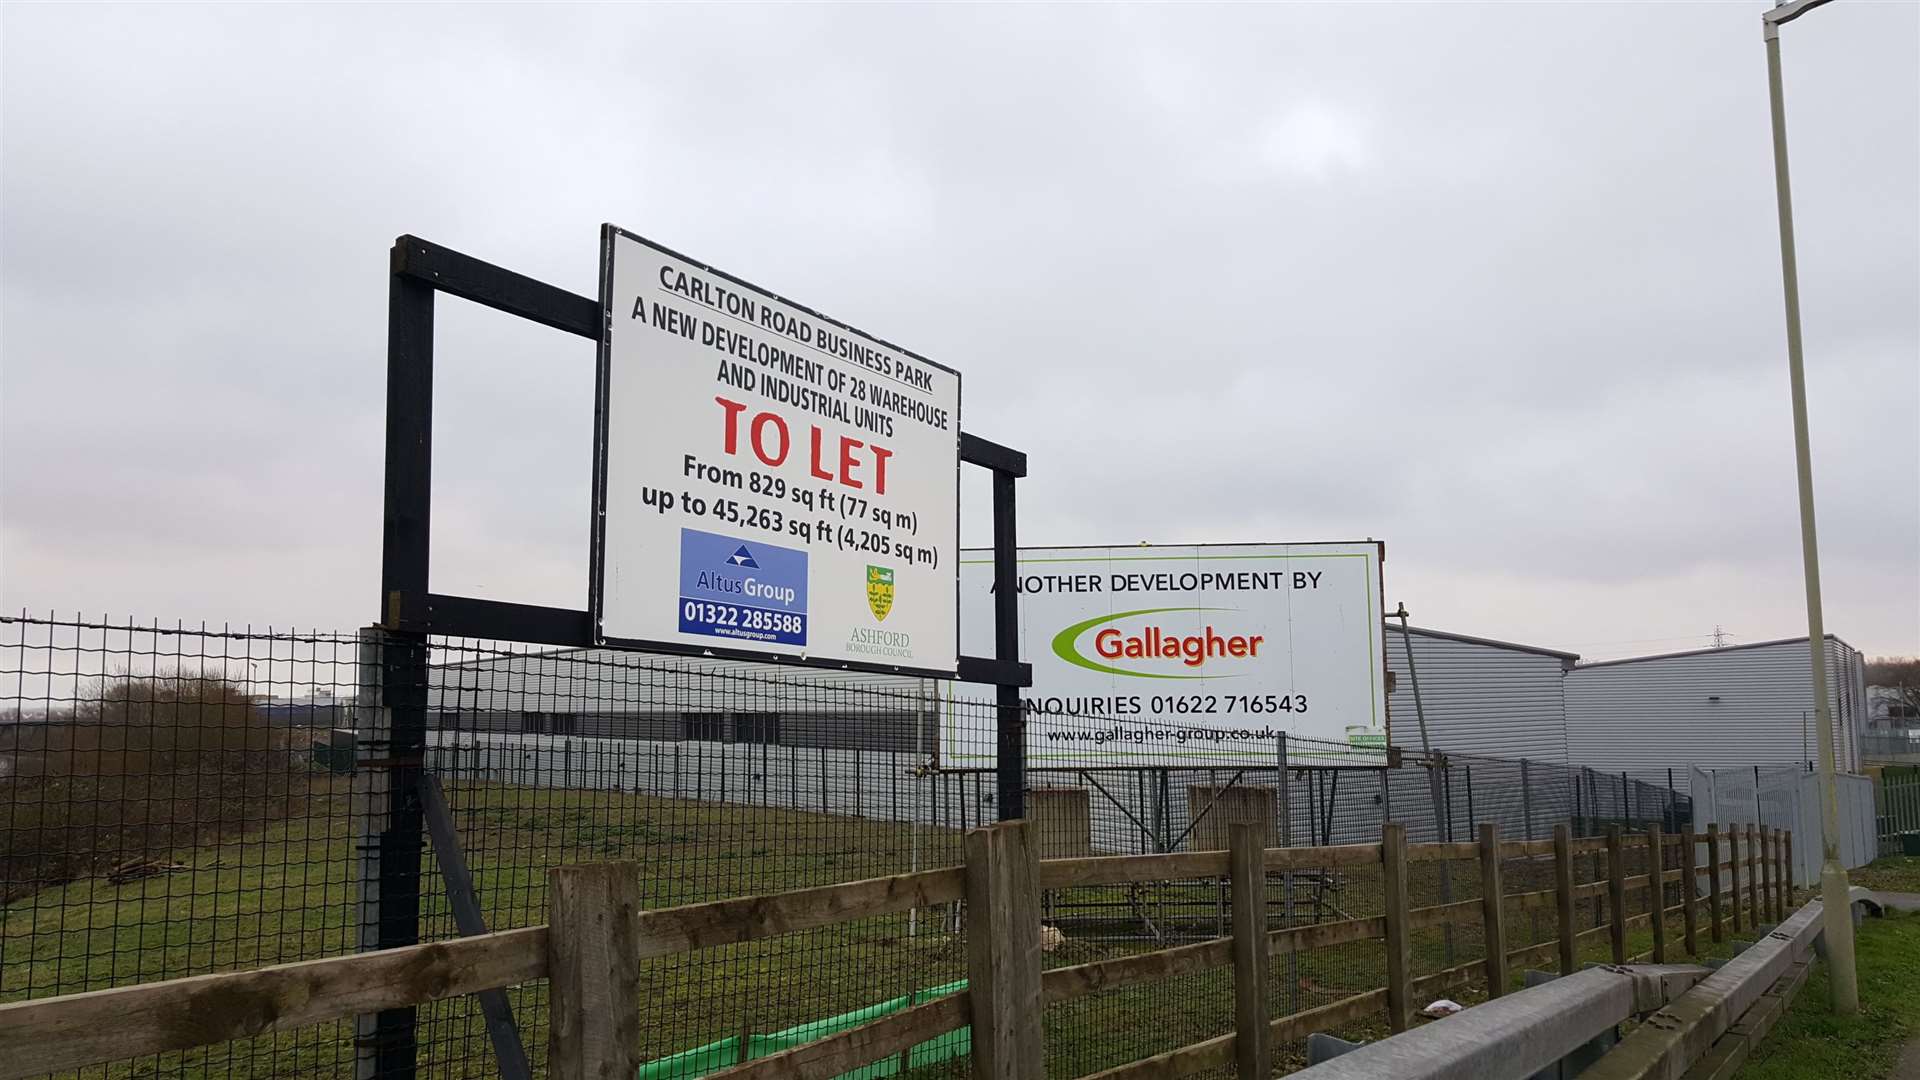 The Carlton Road Business Park is on the former Rimmel site